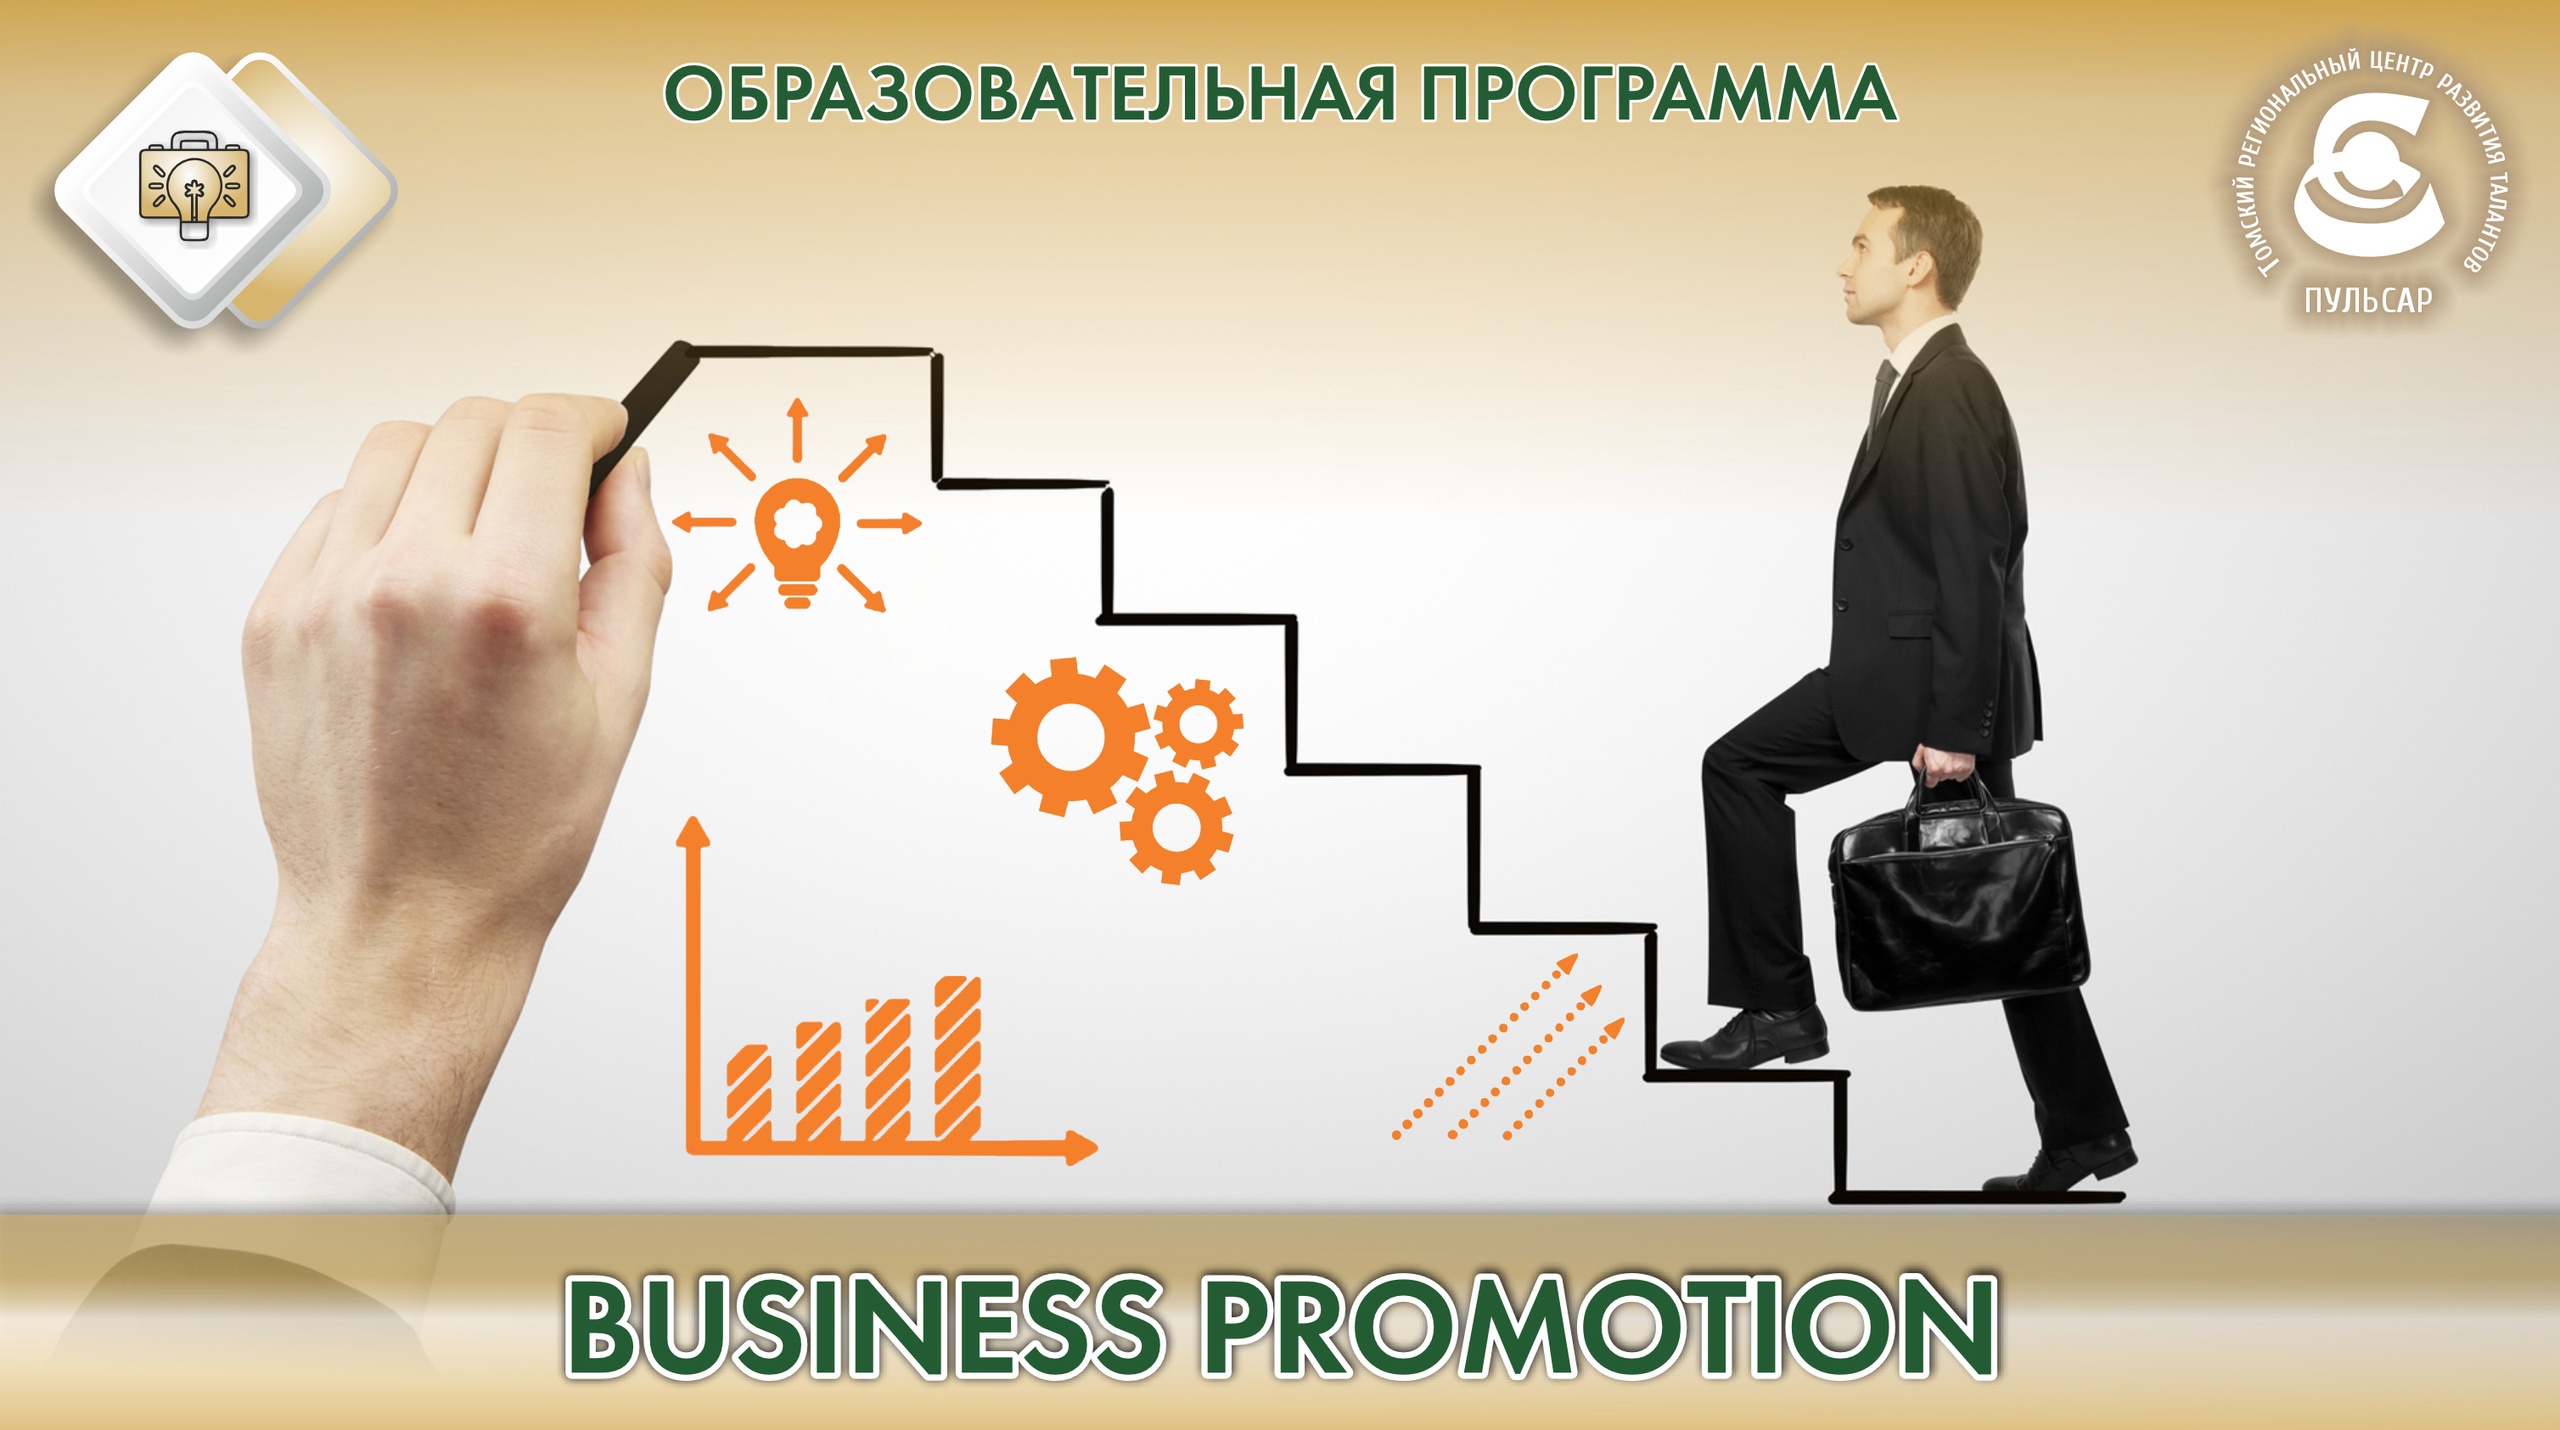 Business promotion